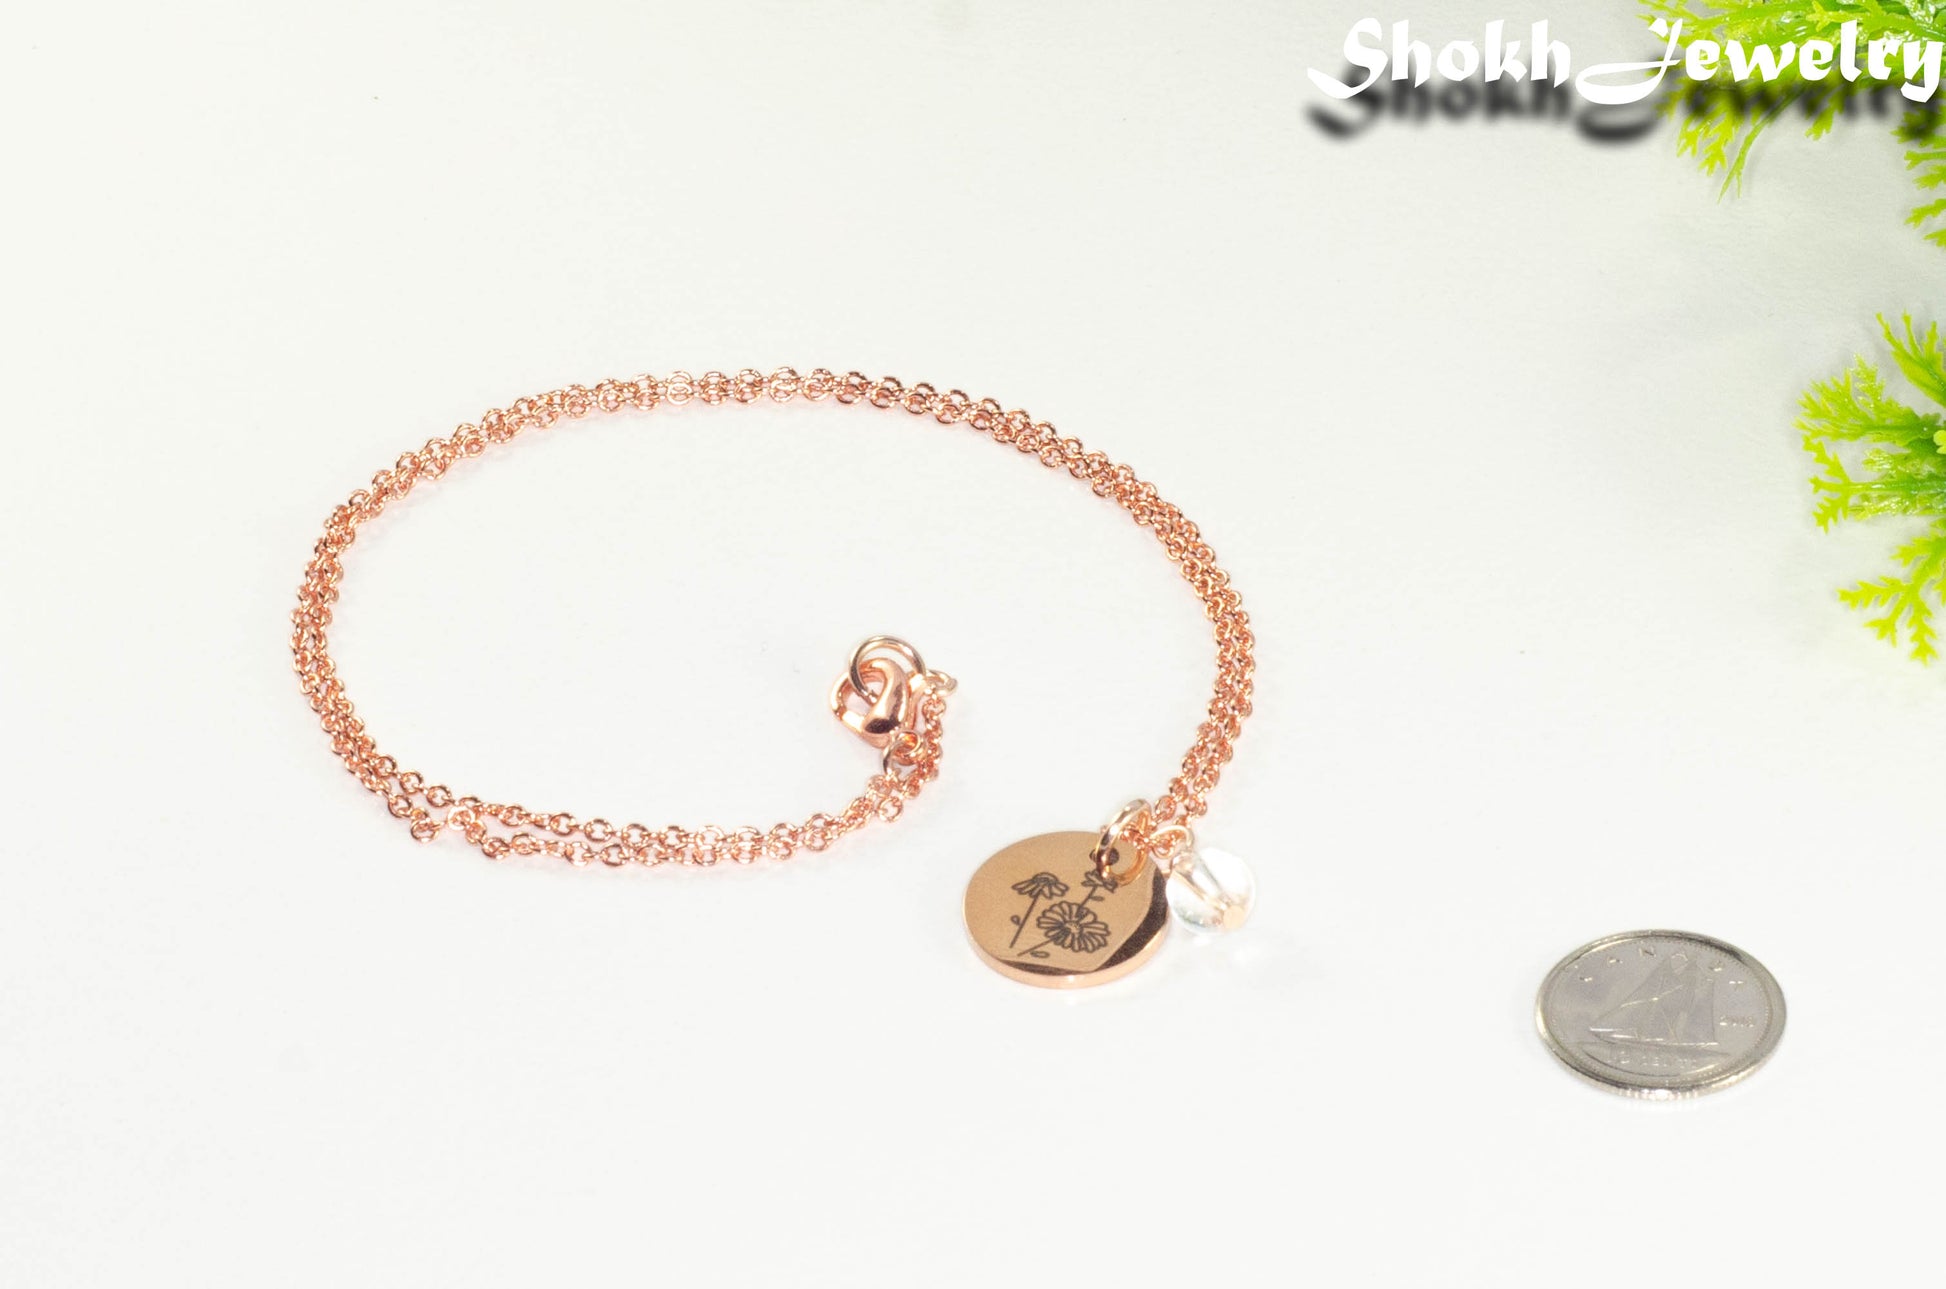 Rose Gold Plated April Birth Flower Necklace with Clear Quartz Birthstone Pendant beside a dime.